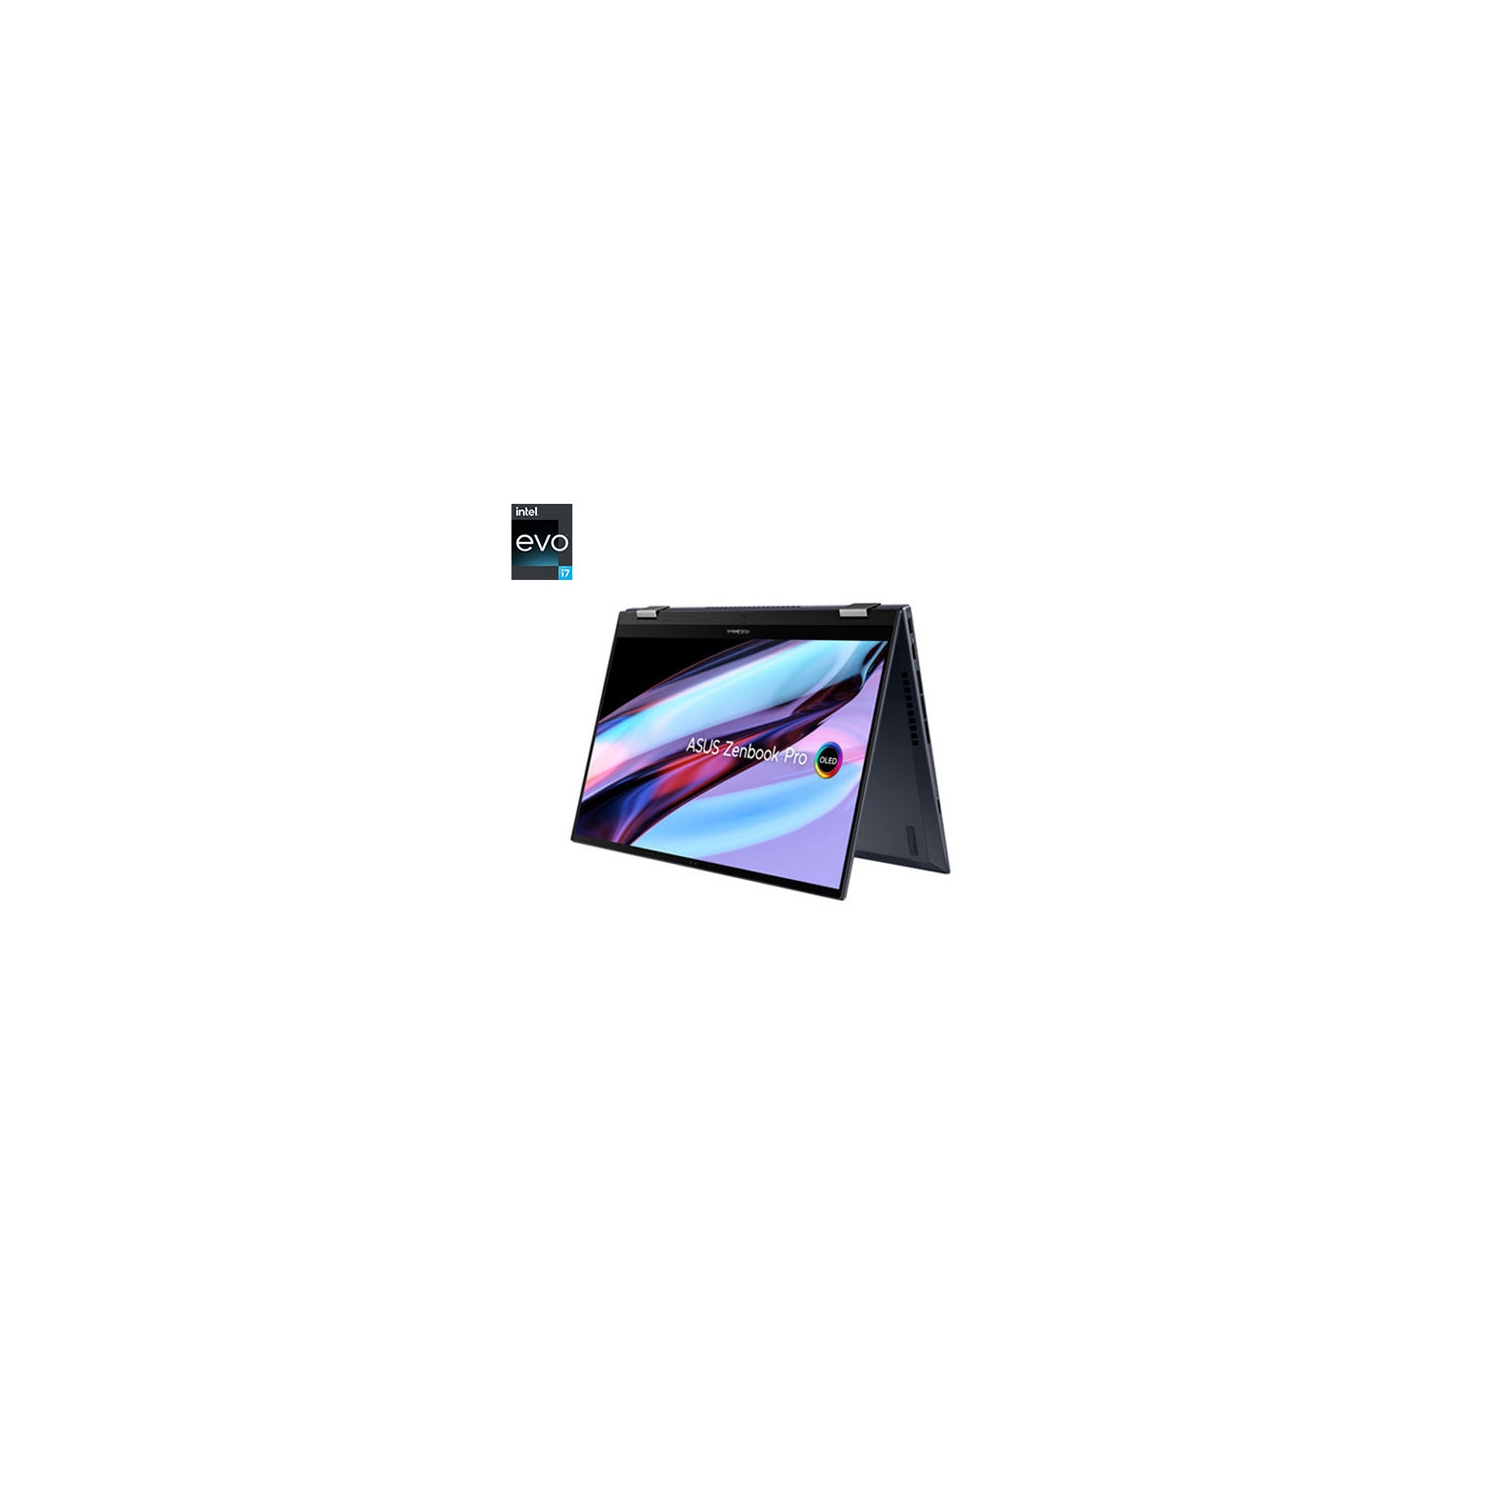 Refurbished (Excellent) - ASUS ZenBook Pro OLED 2.8k 15.6" Touchscreen 2-in-1 Laptop (Intel Core i7-12700H/512GB SSD/16GB RAM)